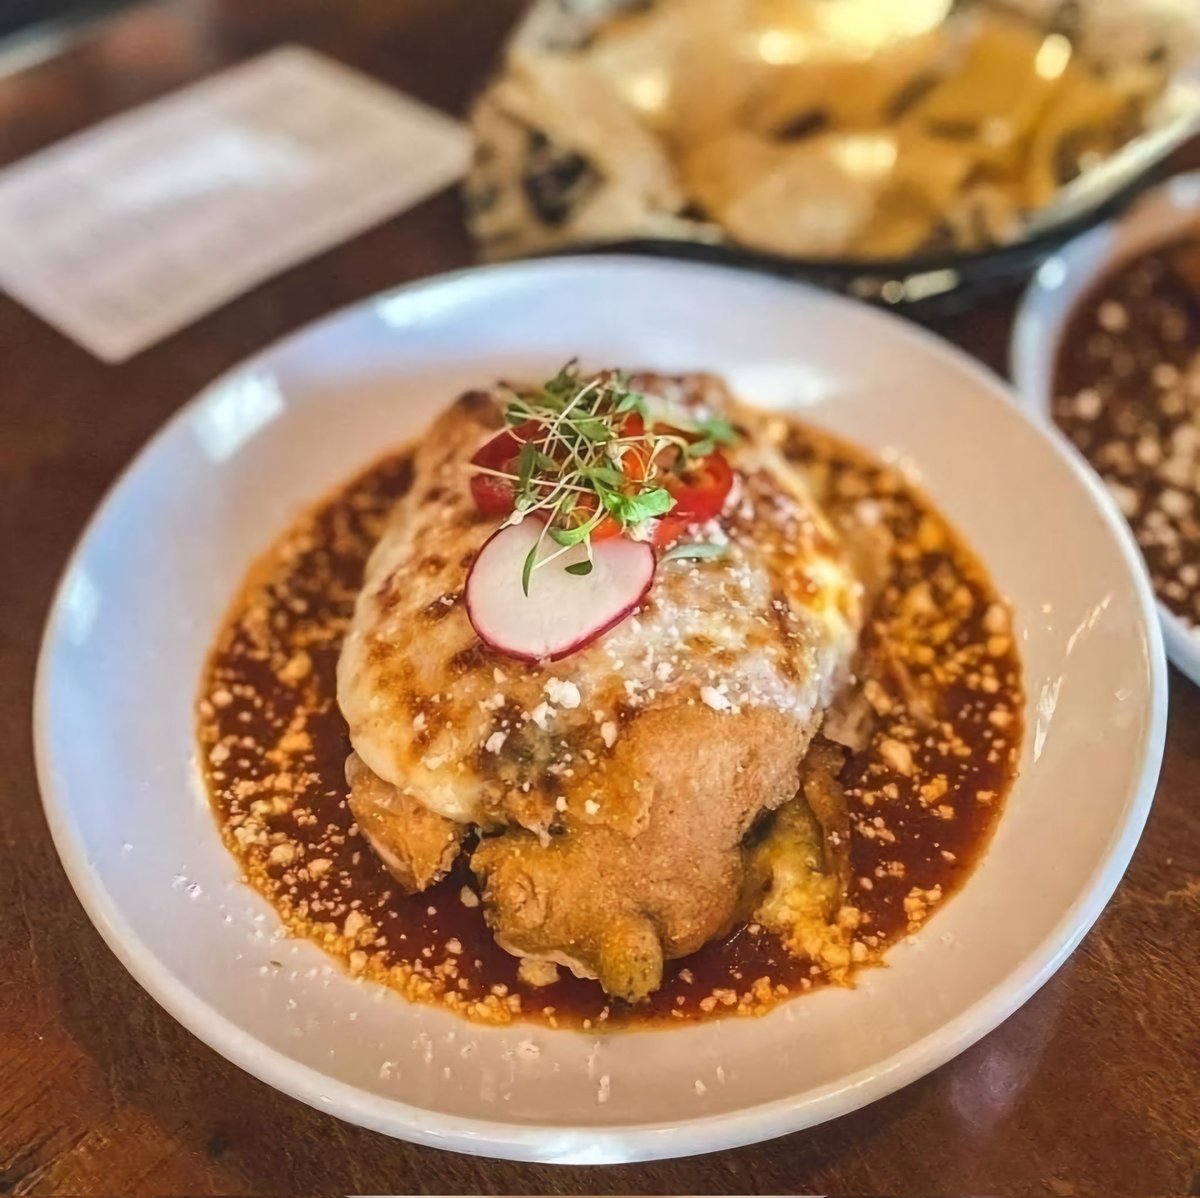 CHILE RELLENO (v) poblano chile stuffed with roasted vegetables + smoked gouda fundido | yellow cornmeal tempora battered | chile guajillo ranchero sauce | pickled fresno chiles #modmex OPEN tonight 4pm-9pm, HAPPY HOUR until 6pm plus its #tequilatuesday